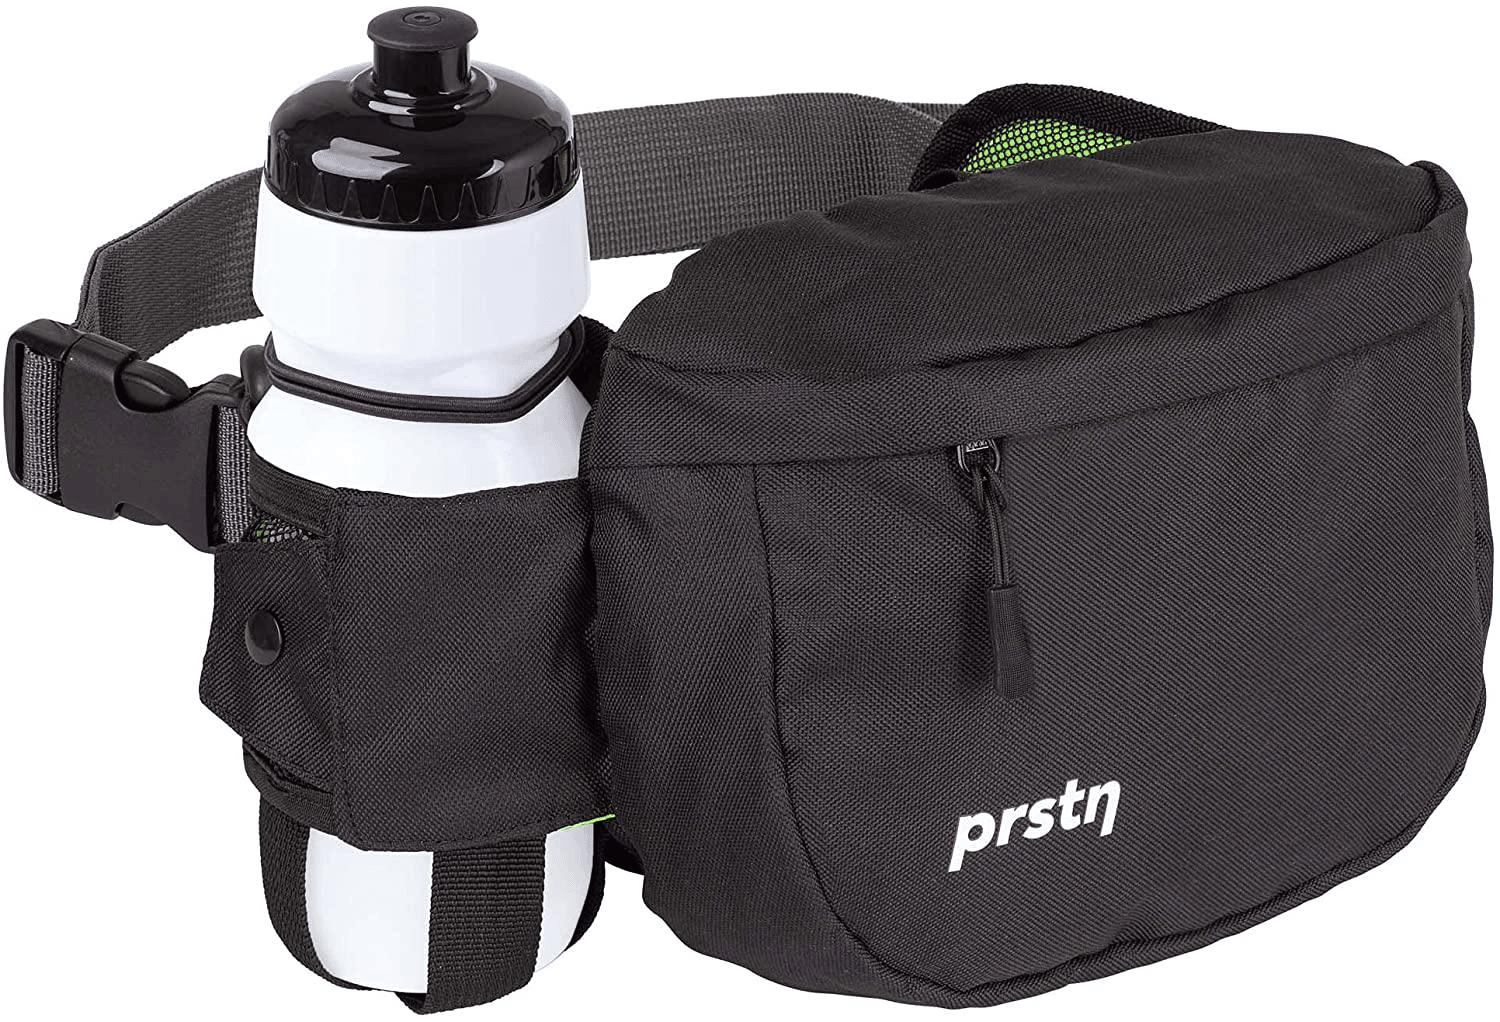 An idea to fix a bike tool bag that is too heavy is to only take the tools that you need and to carry them in a small fanny pack like this.